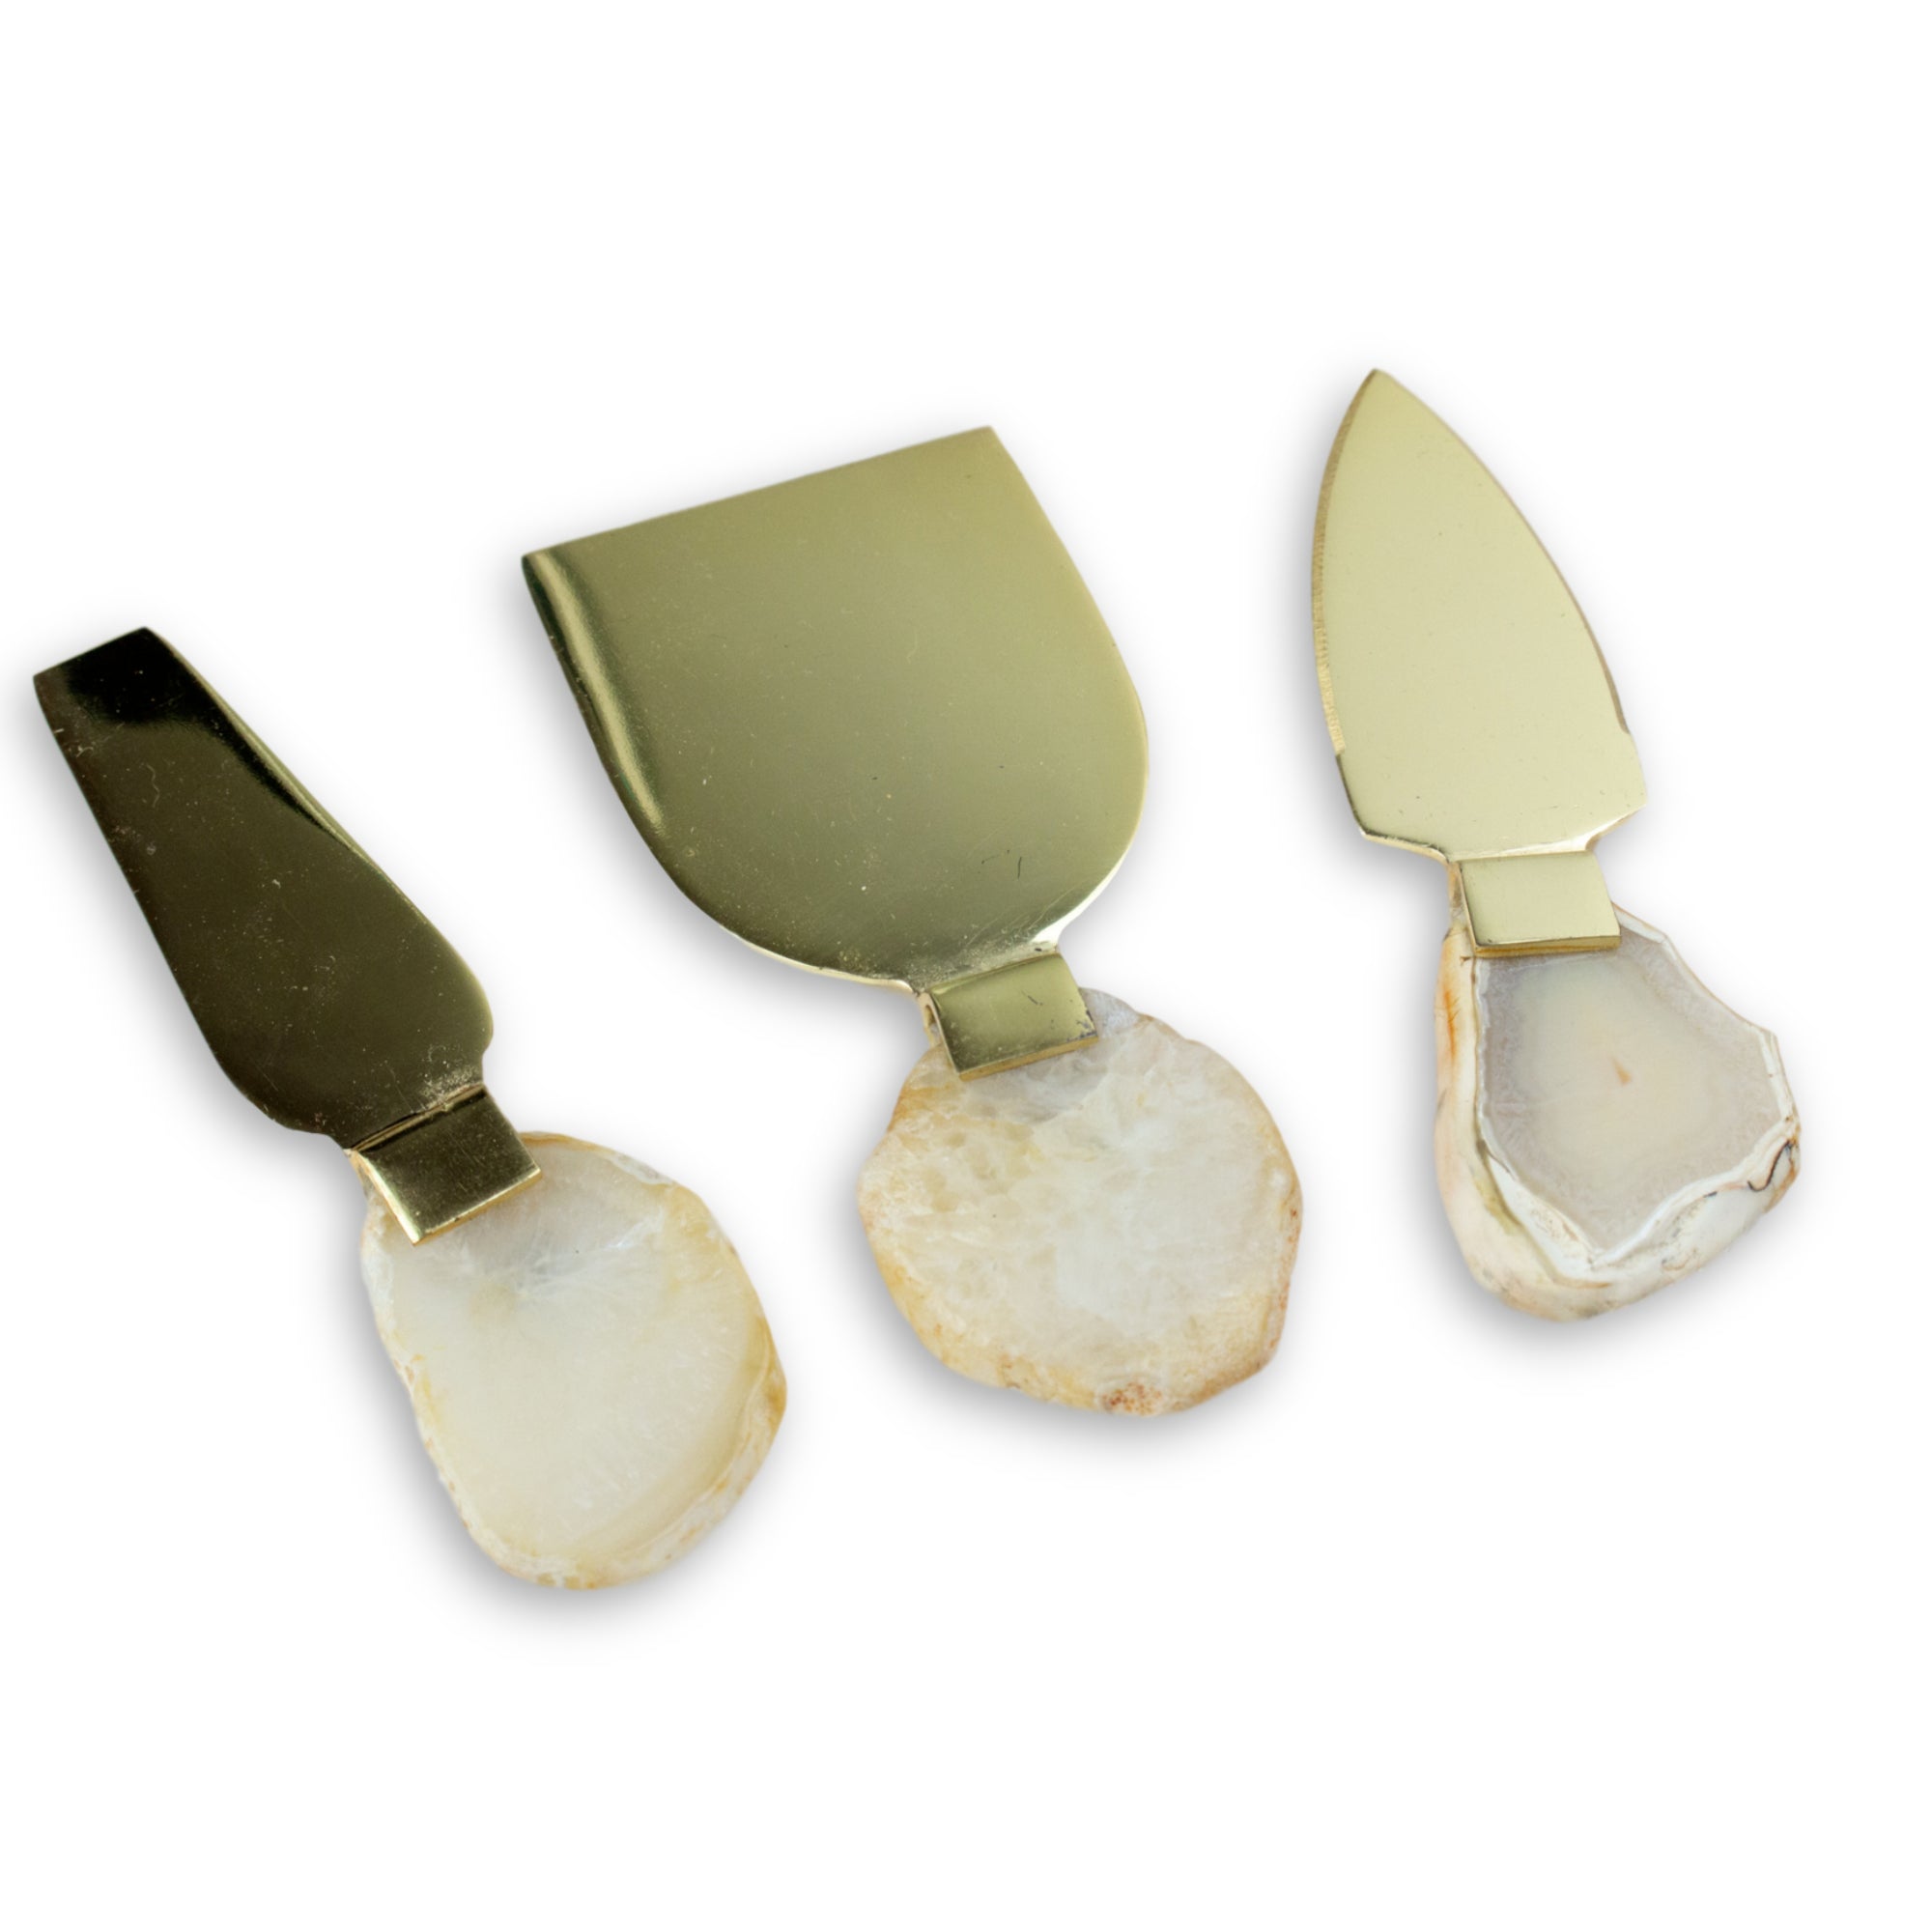 Set of 3 Agate Cheese Knives